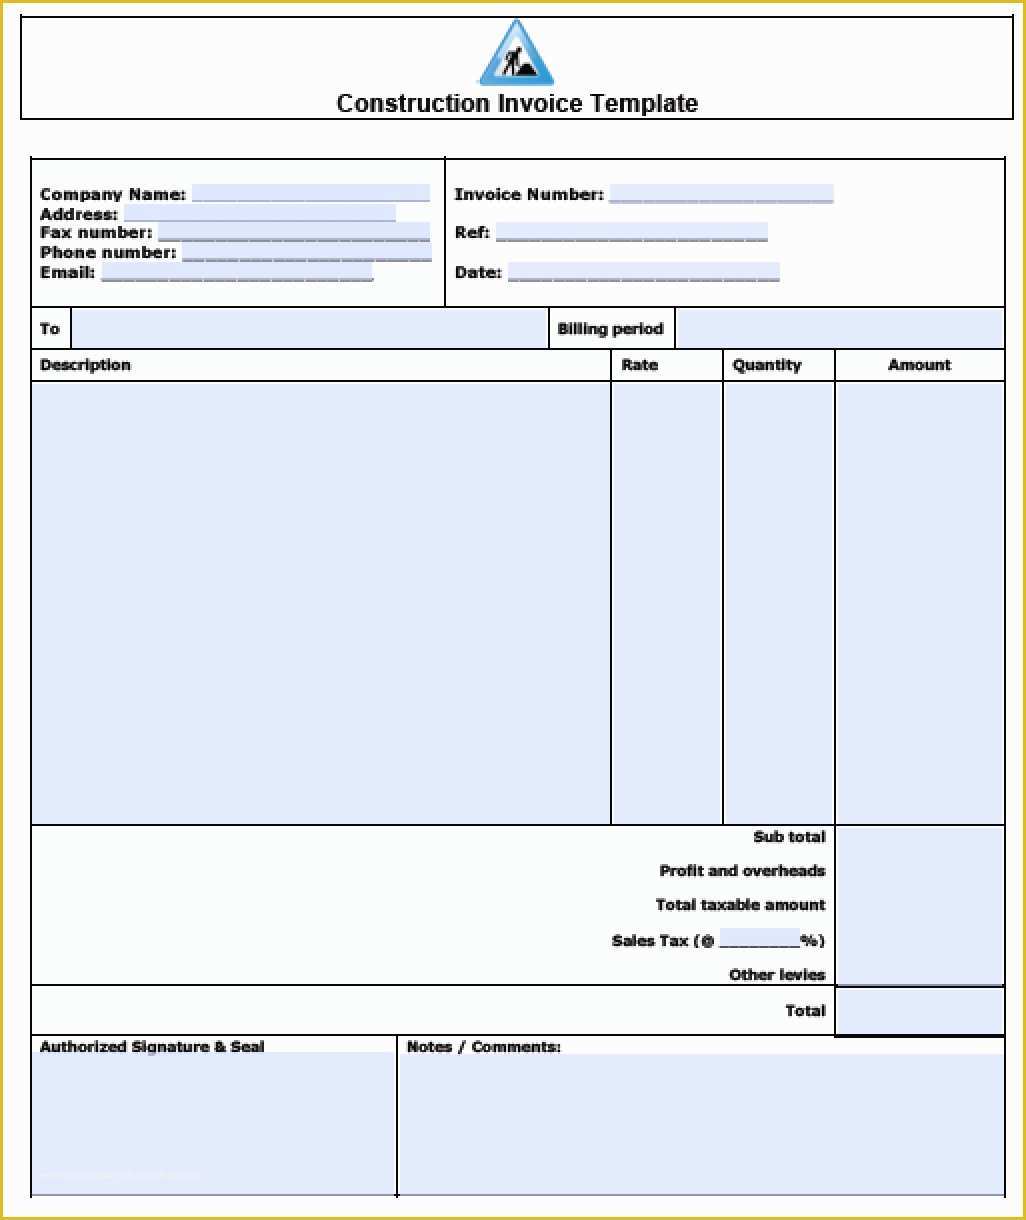 Construction Invoice Templates Free Download Of Free Construction Invoice Template Excel Pdf